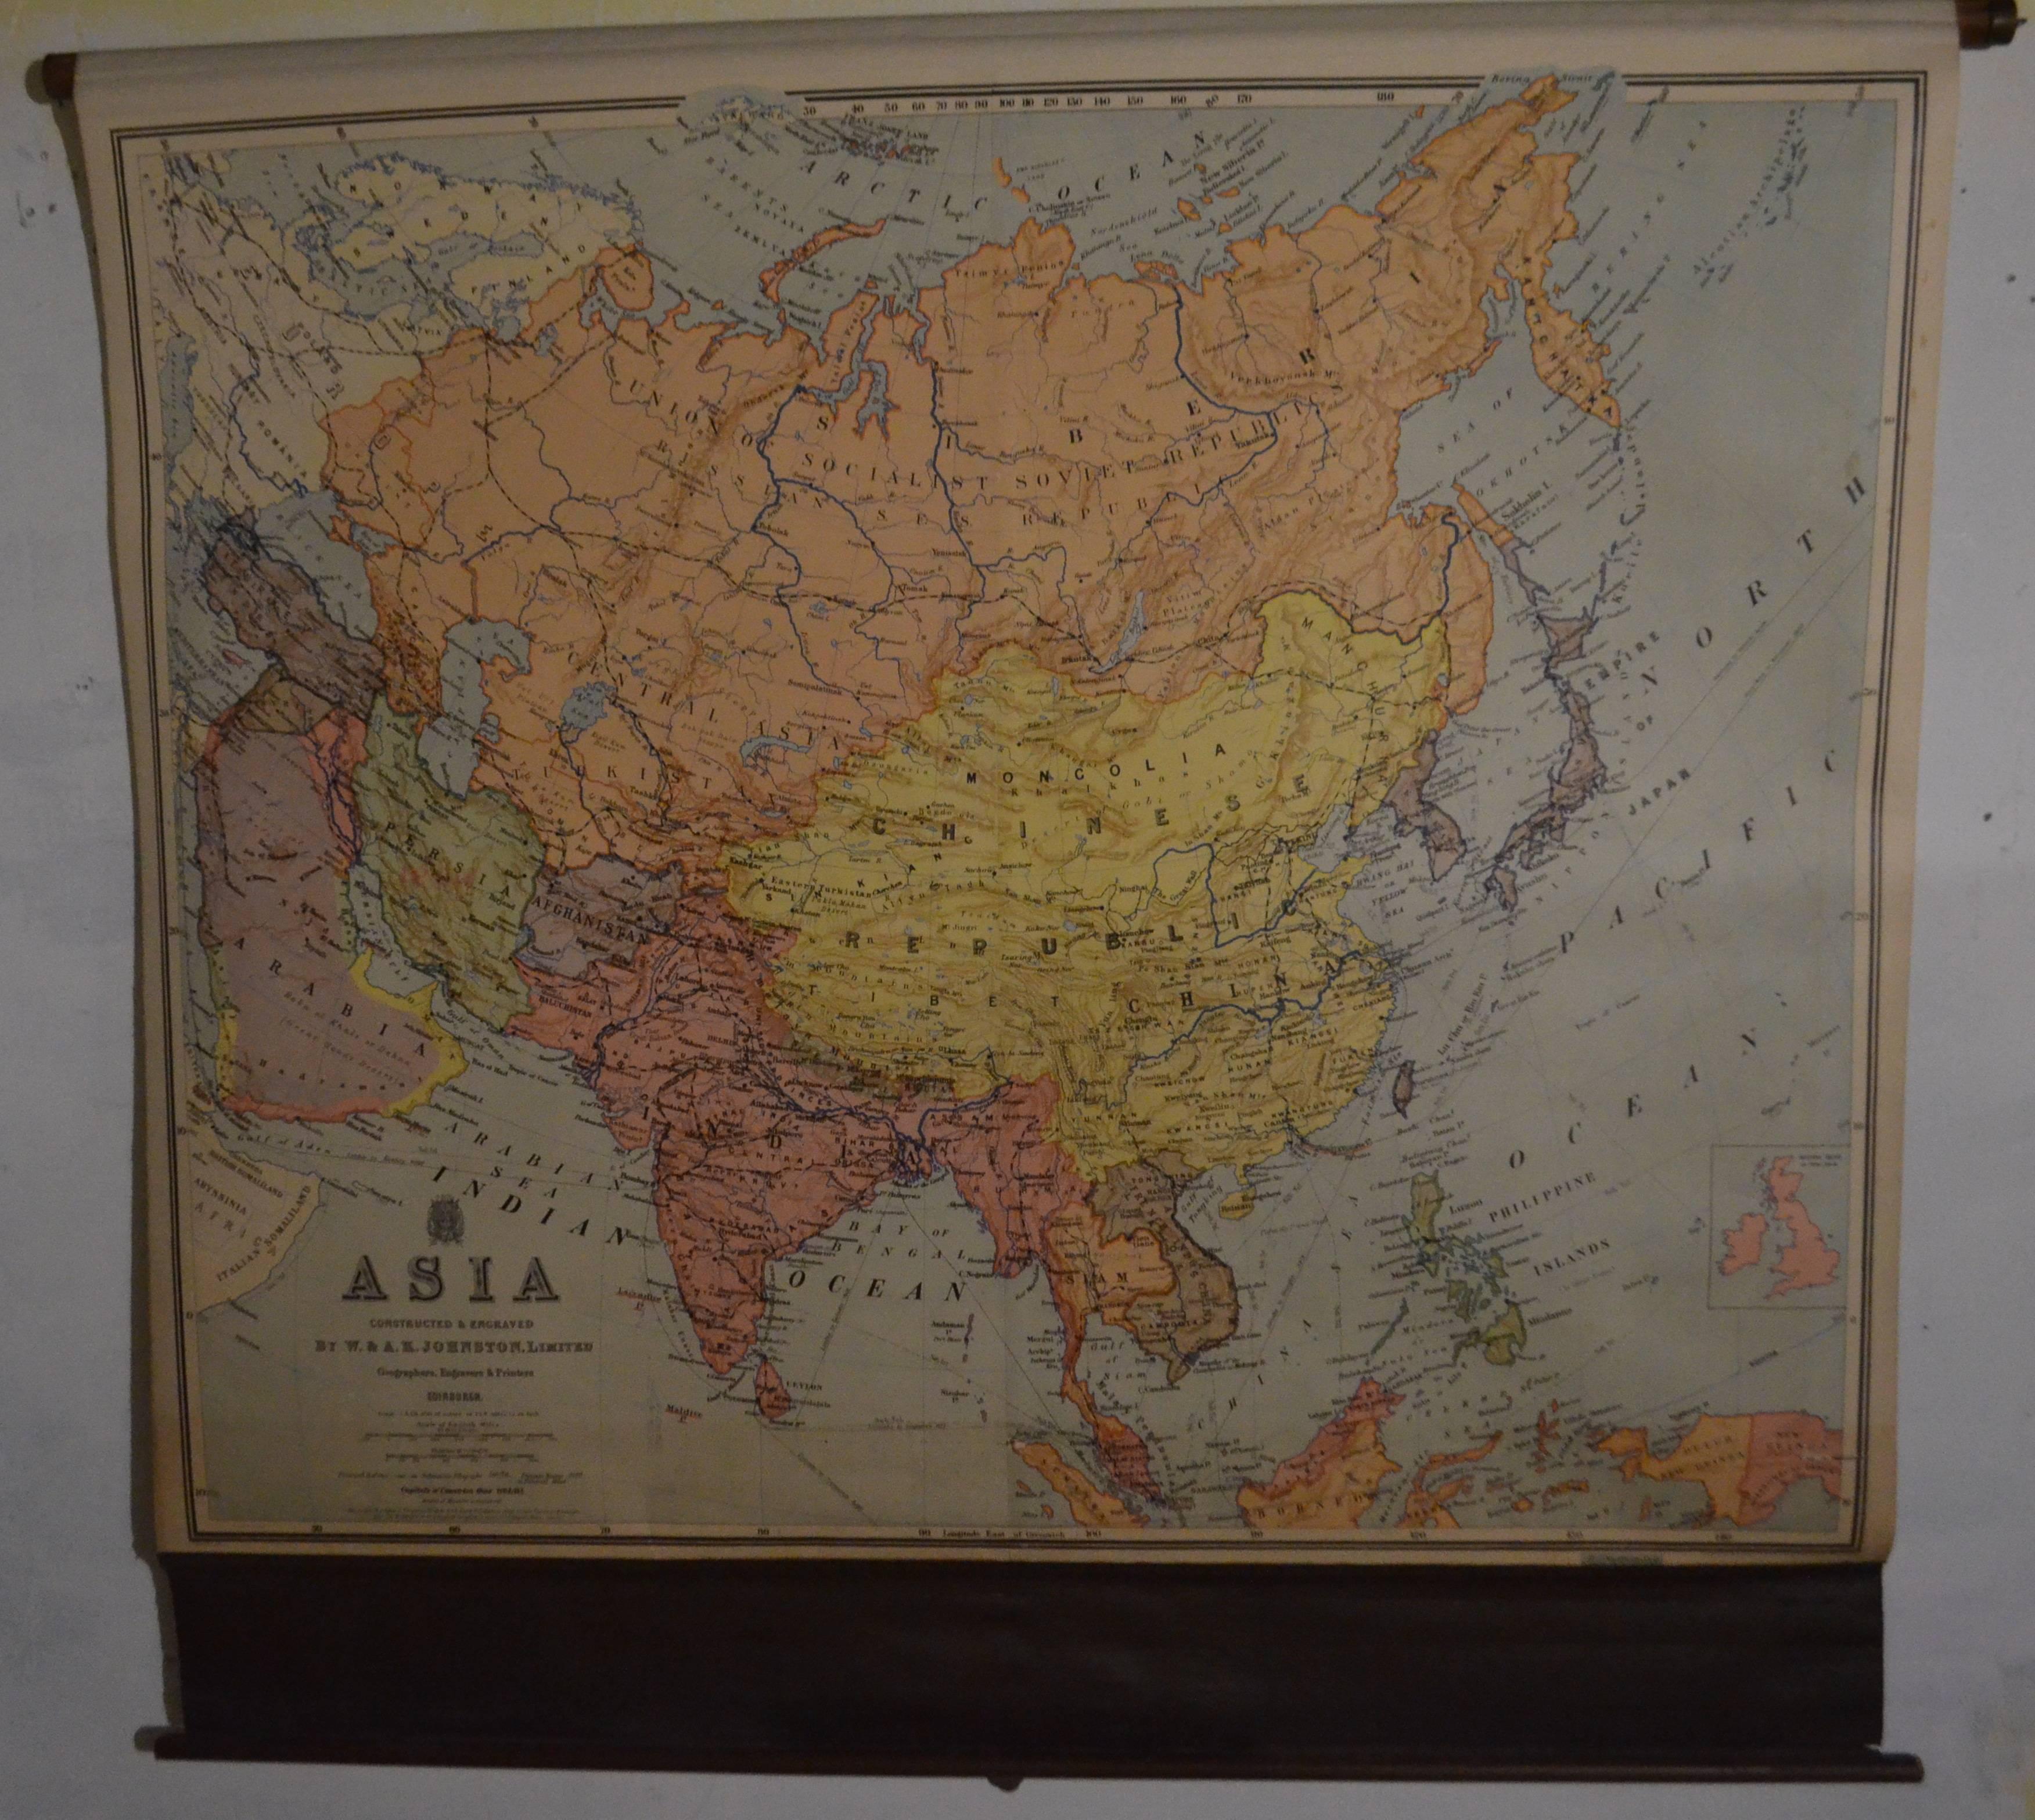 Map of Asia from the early 1900s. Constructed and engraved in Edinburgh, Scotland and mounted on a retractable wooden roller. Beautifully rendered in illustrative detail and subtle range of soft colors.